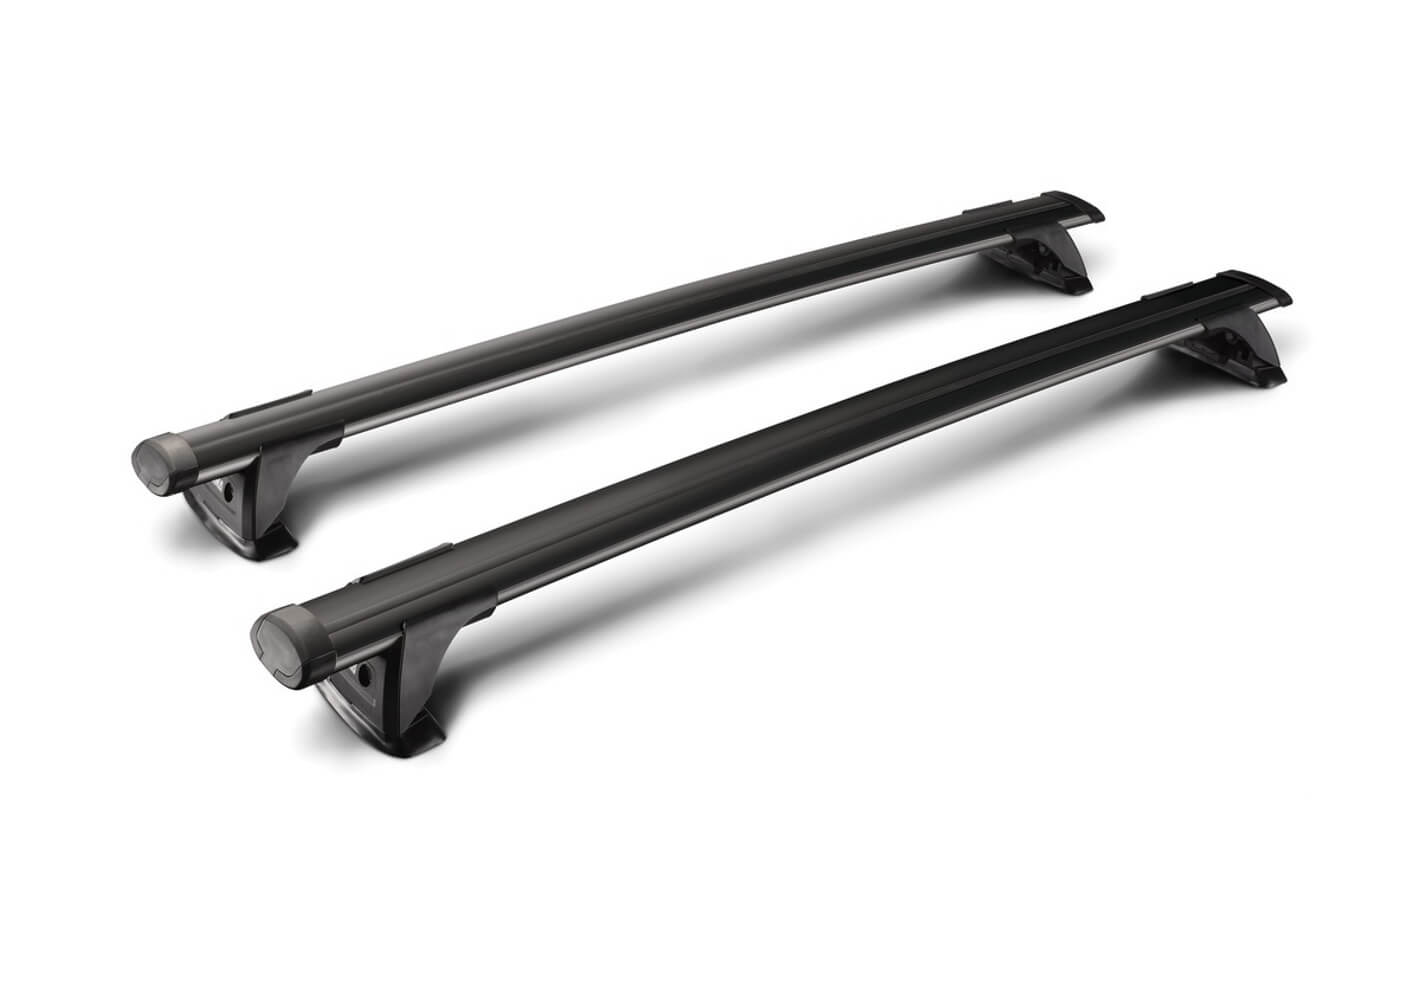 Nissan Primastar L1 (SWB) H1 (low roof) (2003 to 2017):Yakima roof bars package - S18B black bars with K723 kit